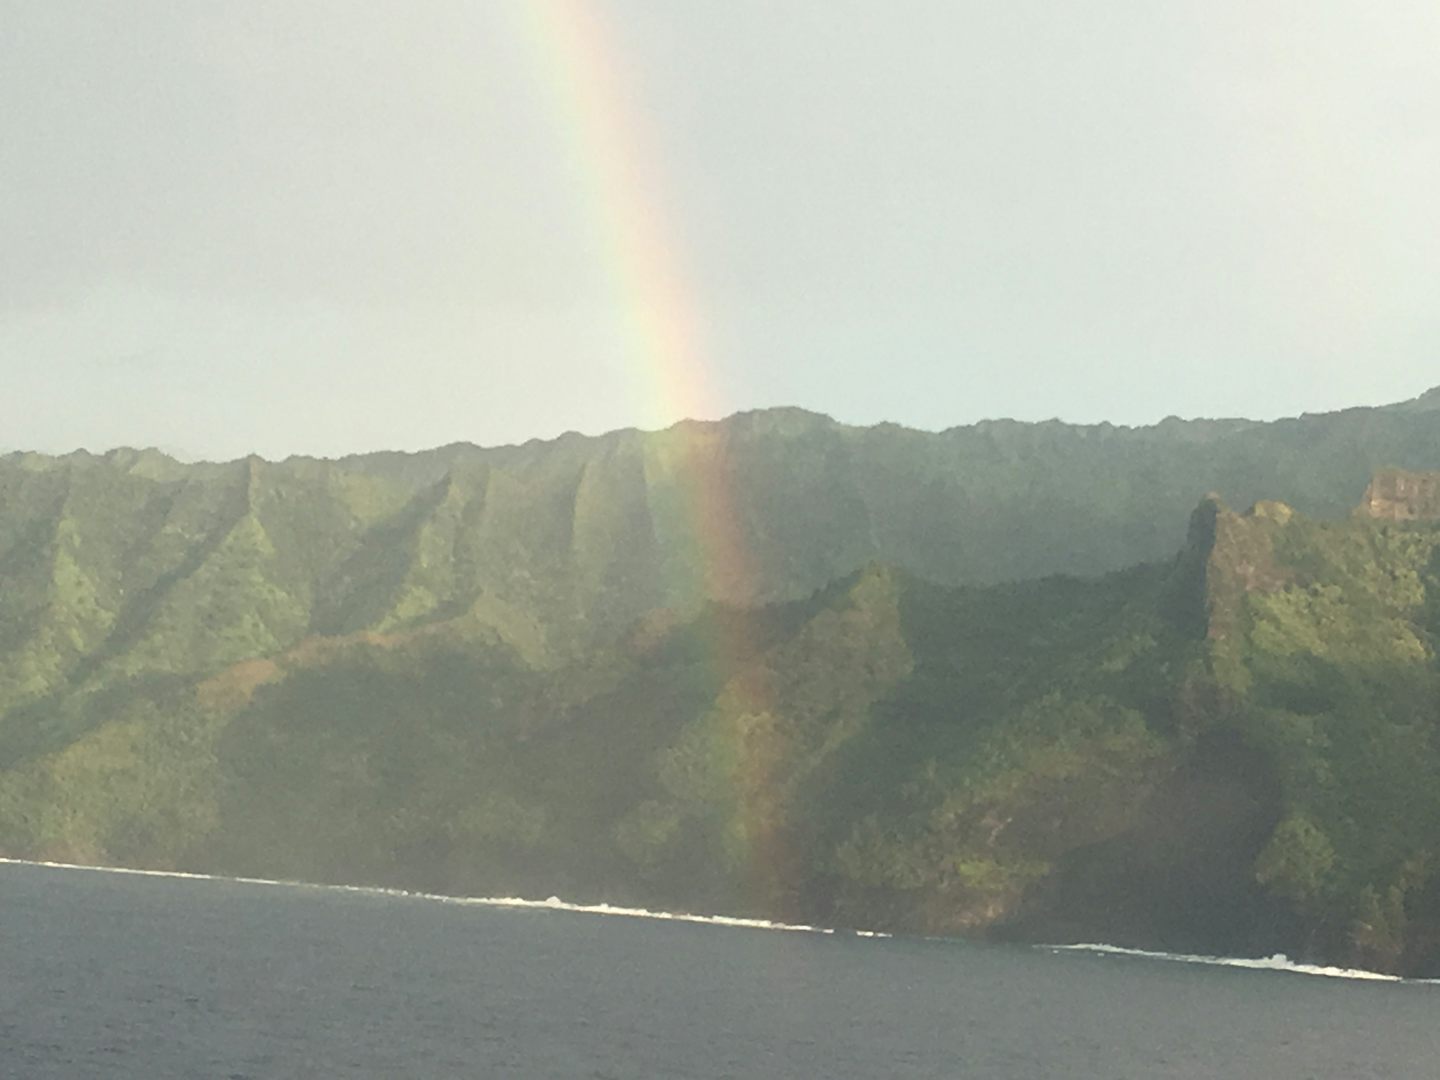 Pride of America sailed by the Na-Pali Coast, Kauai, Hawaii. This is only accessible by Air or Sea